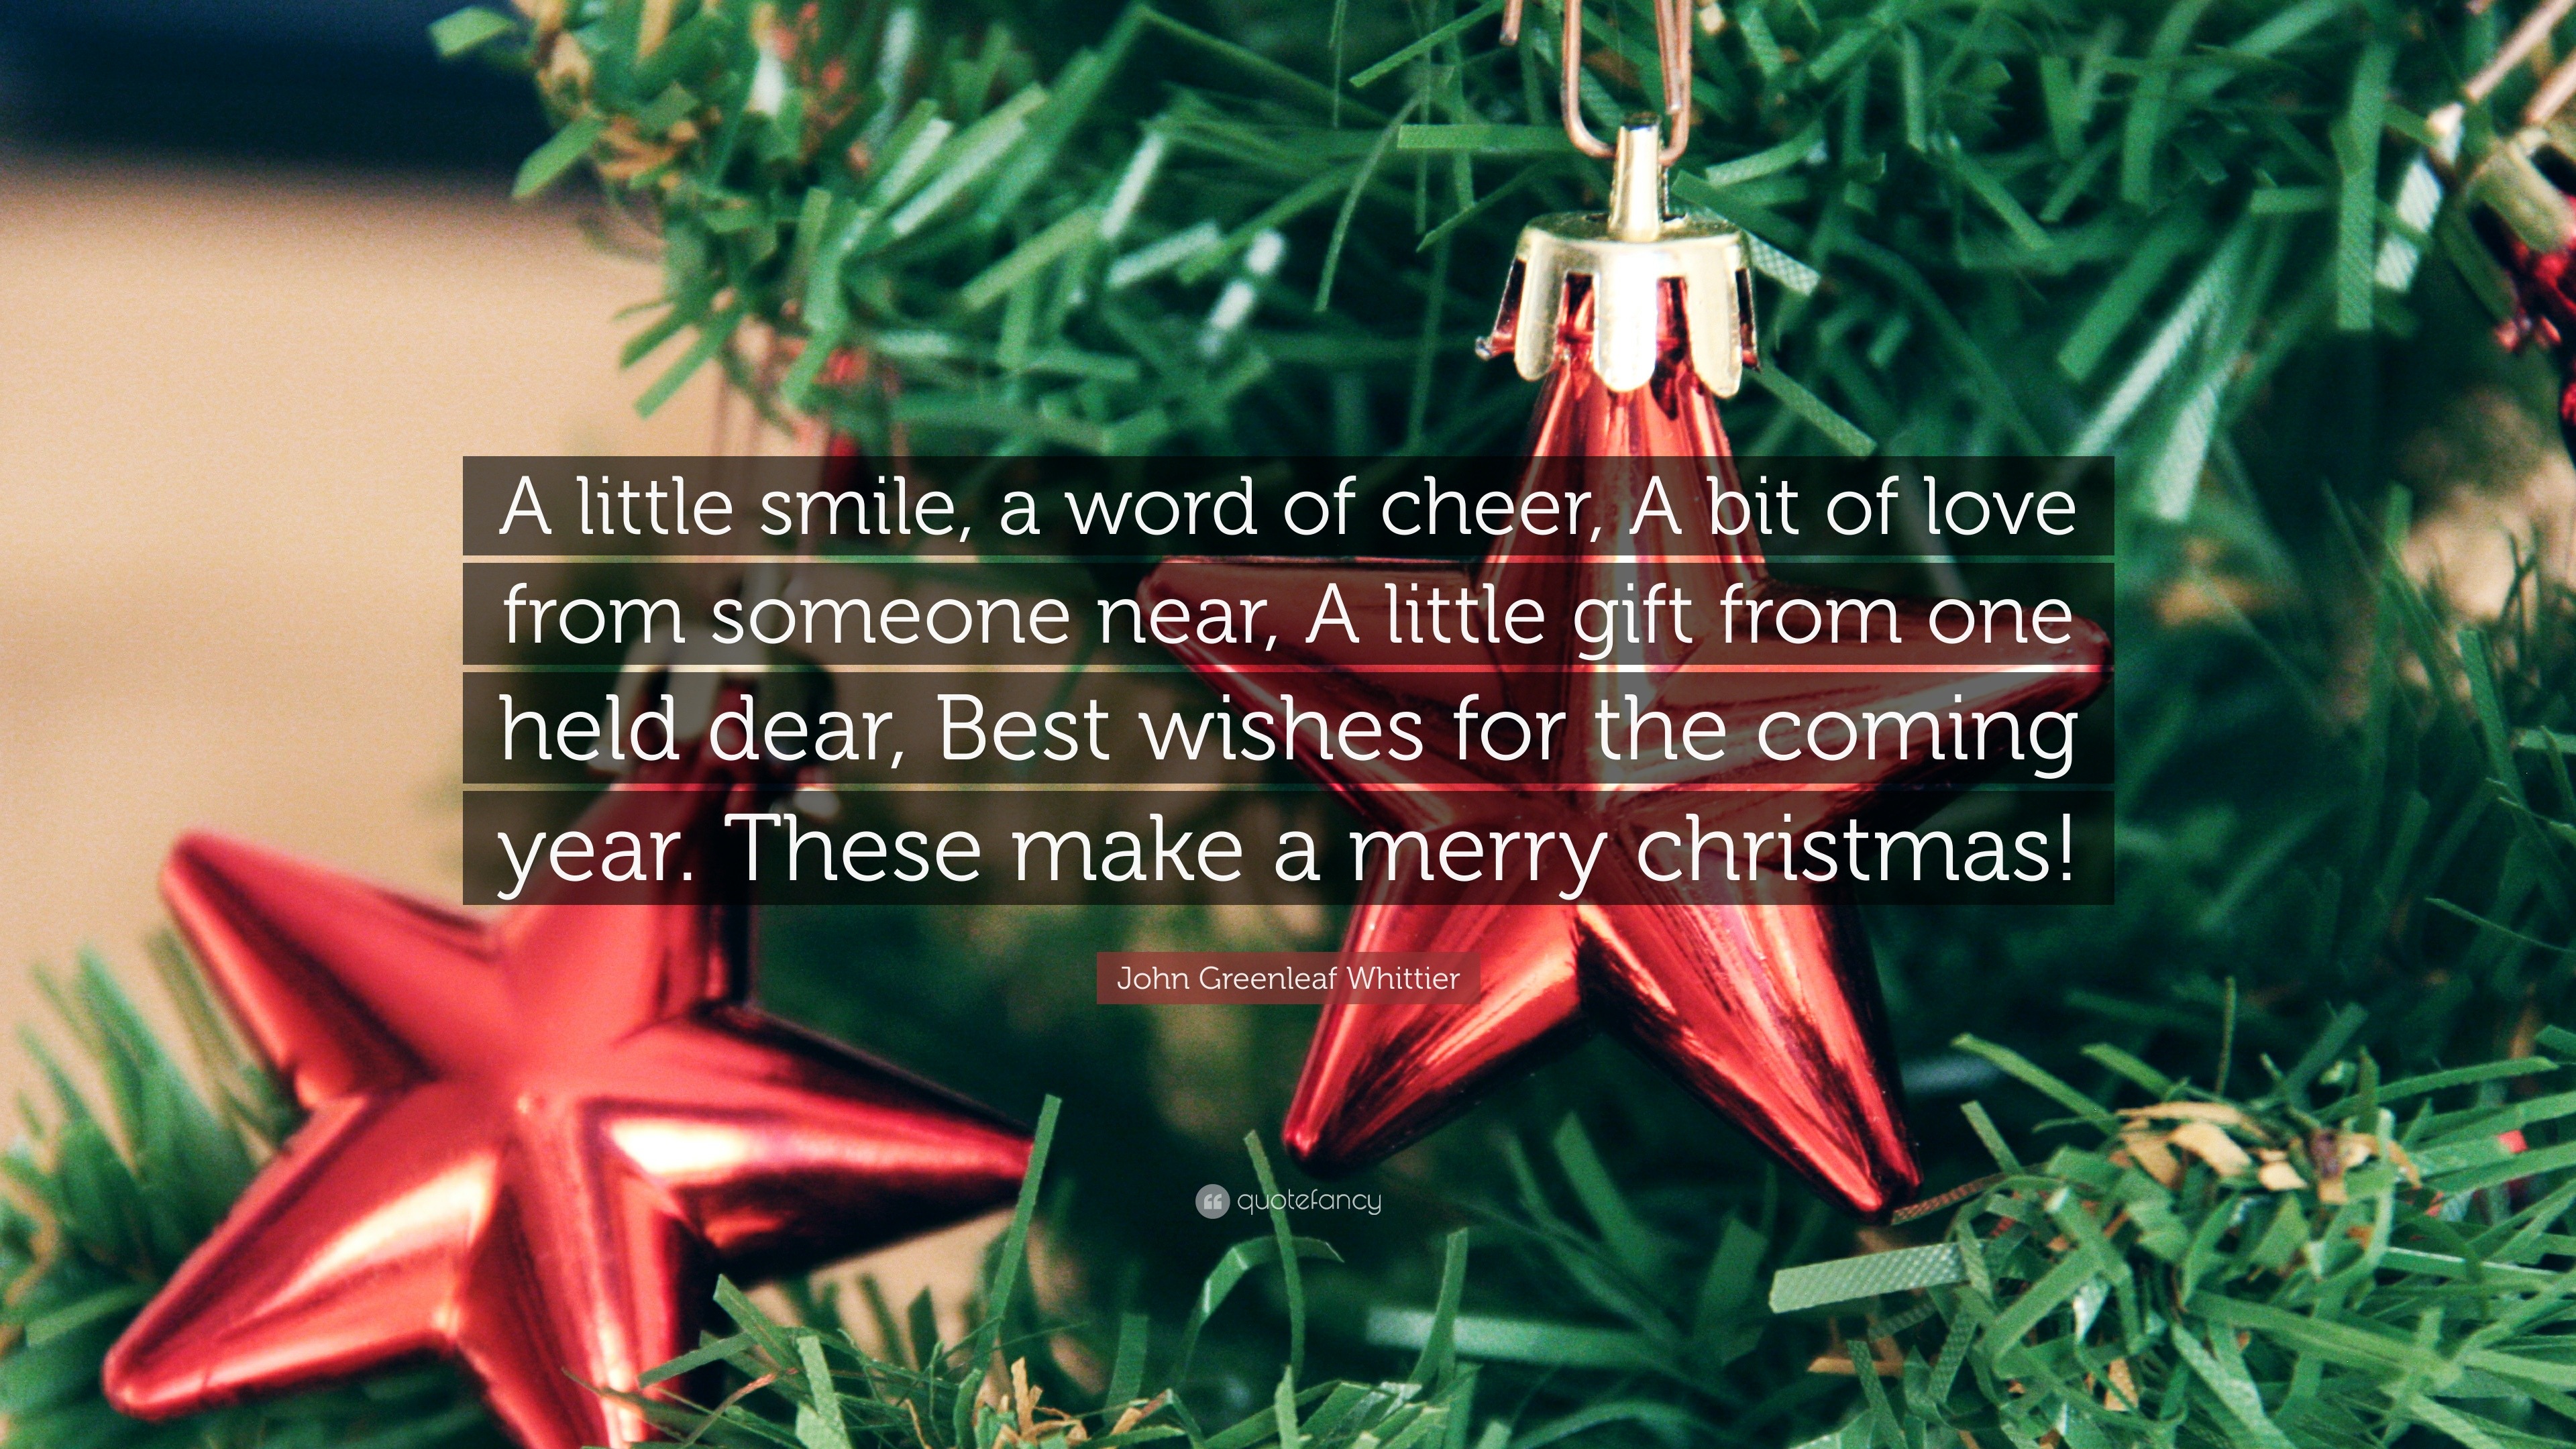 John Greenleaf Whittier Quote “A little smile a word of cheer A